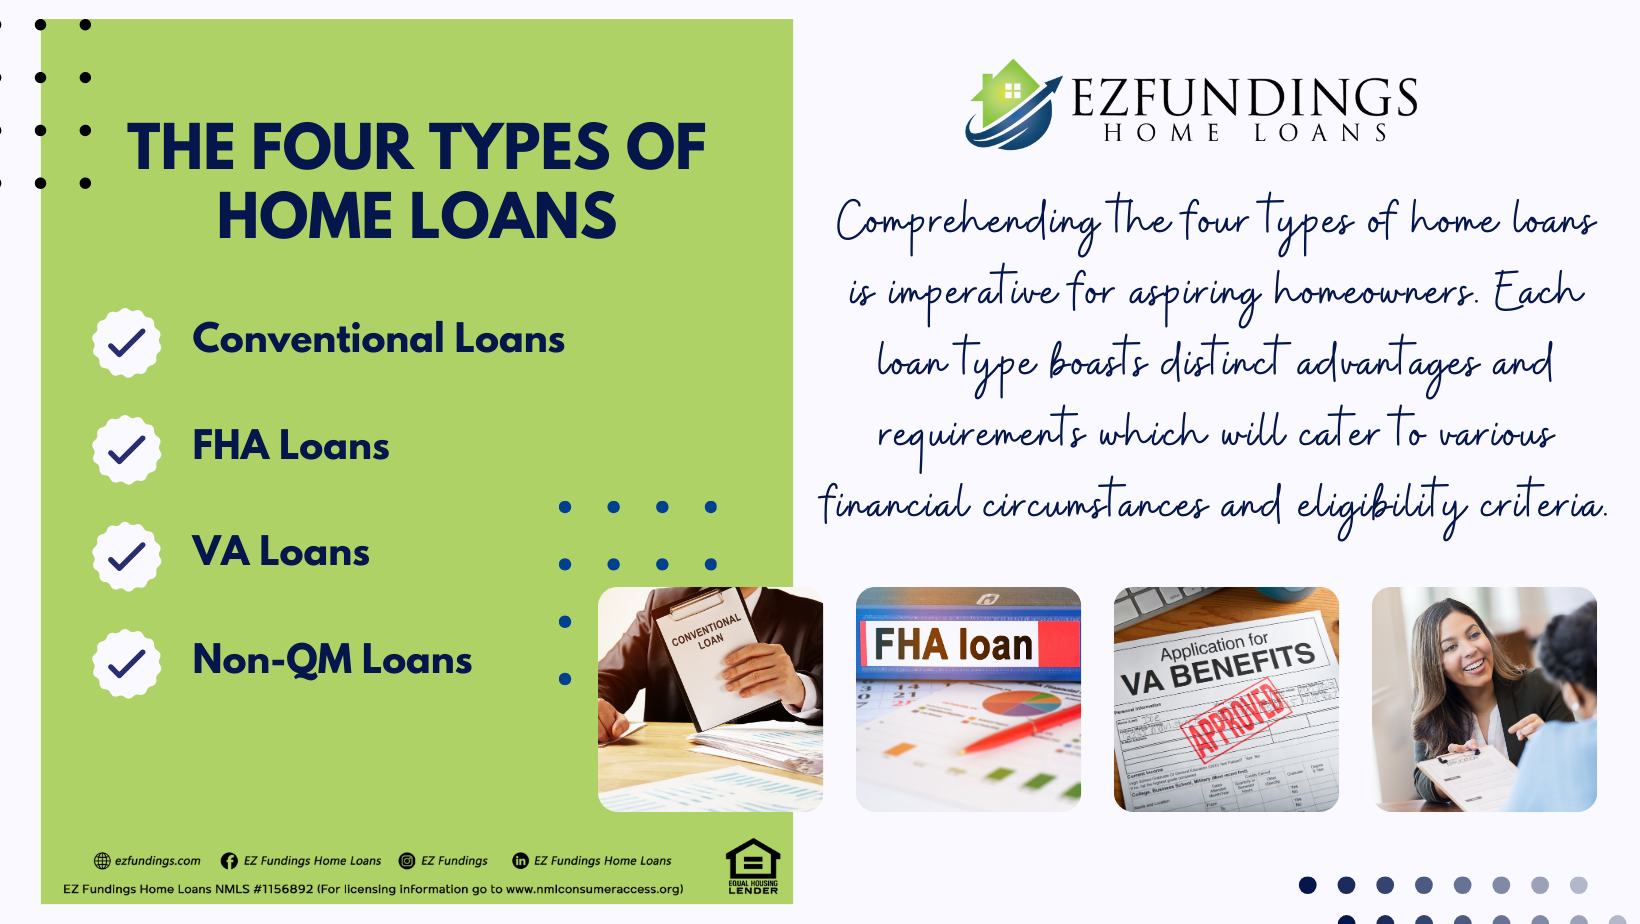 The Four Types of Home Loans: Conventional, FHA, VA, Non-QM. Navigate lending with tailored perks & requirements.